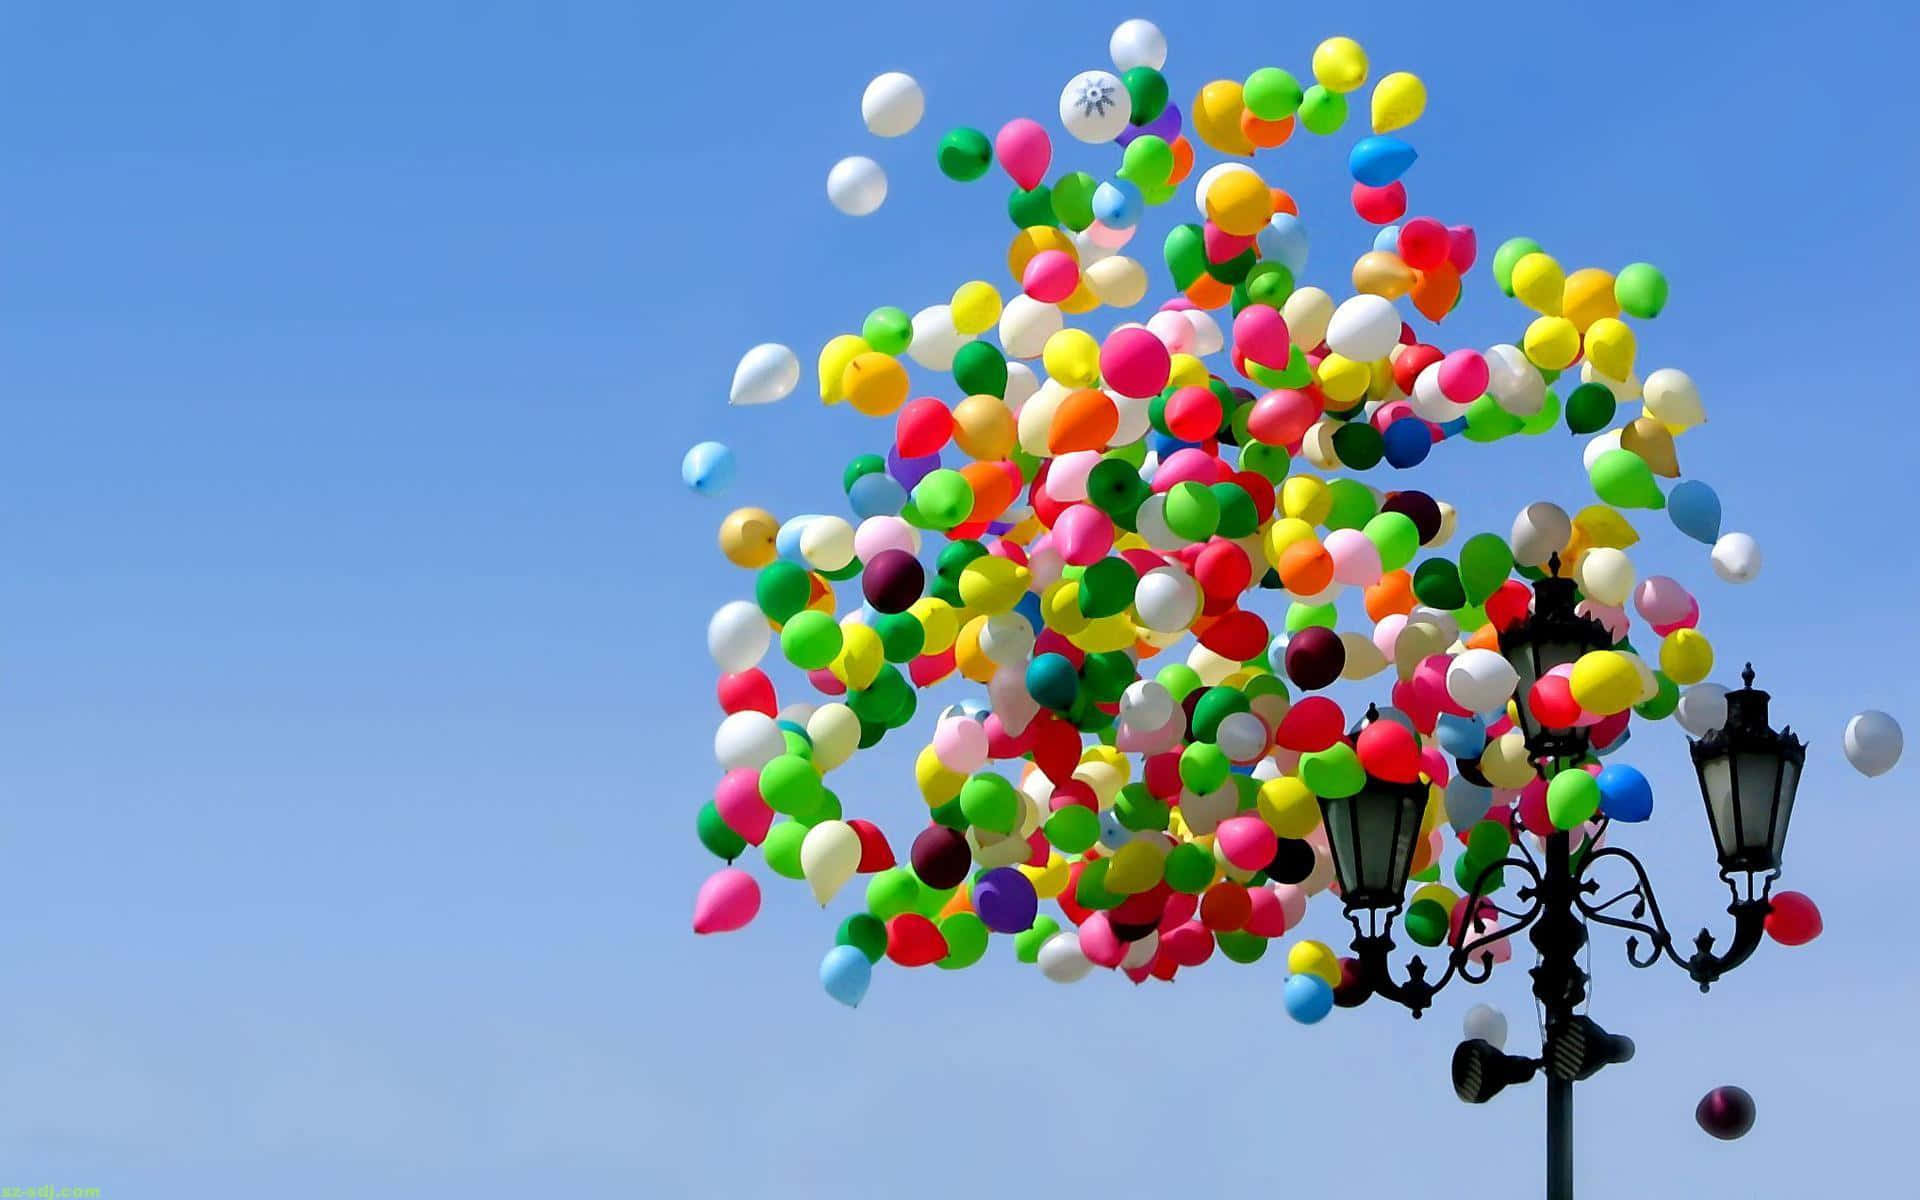 A Street Lamp With Many Balloons Flying In The Sky